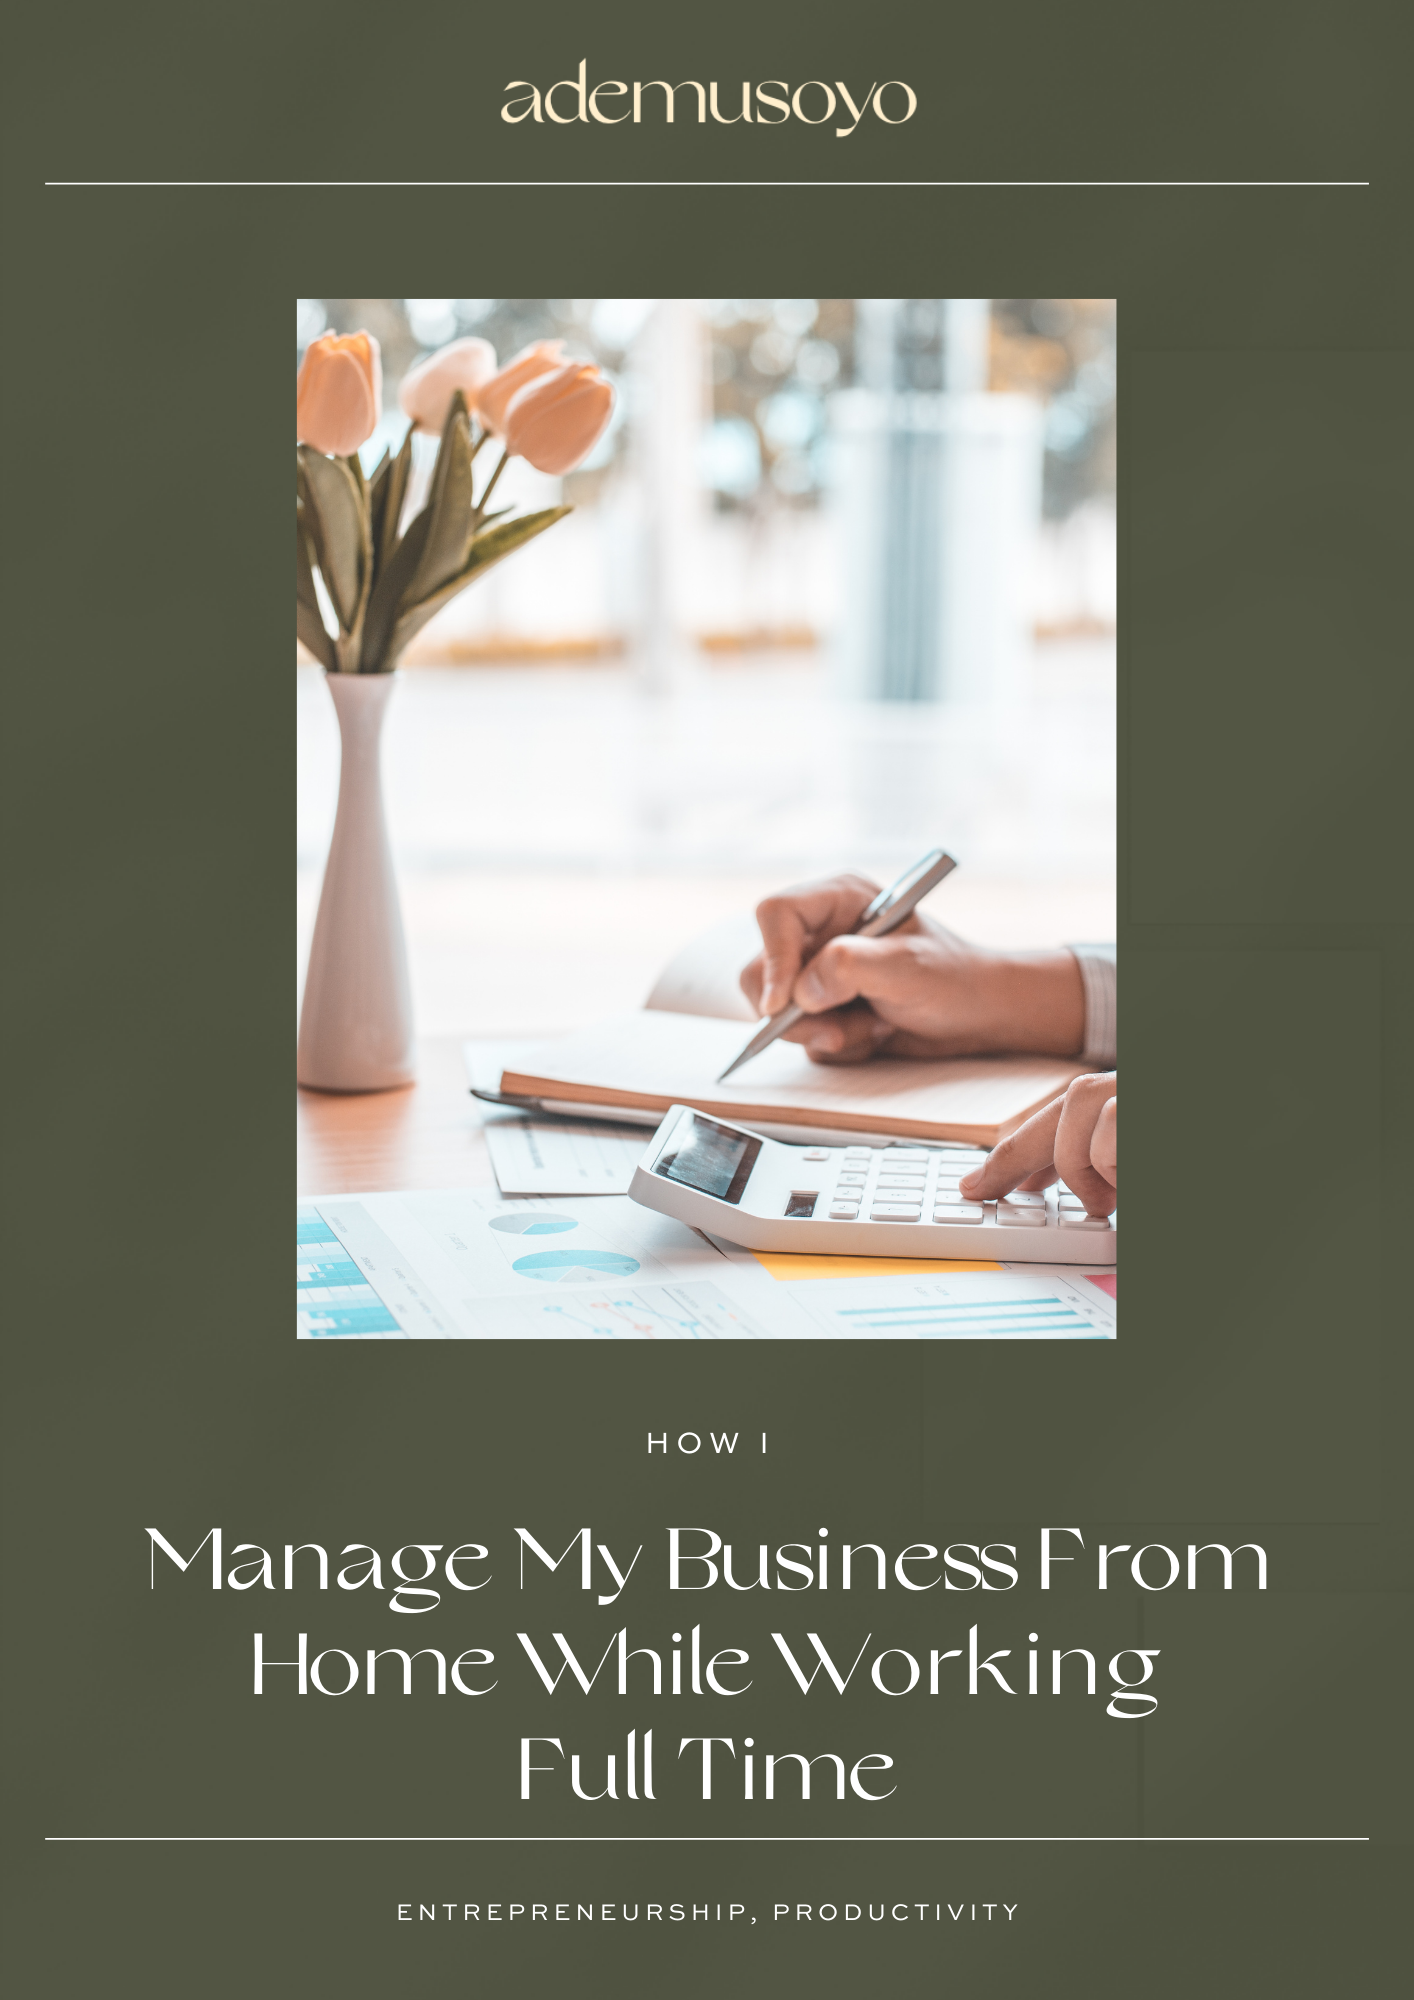 How I Manage My Business From Home While Working Full Time